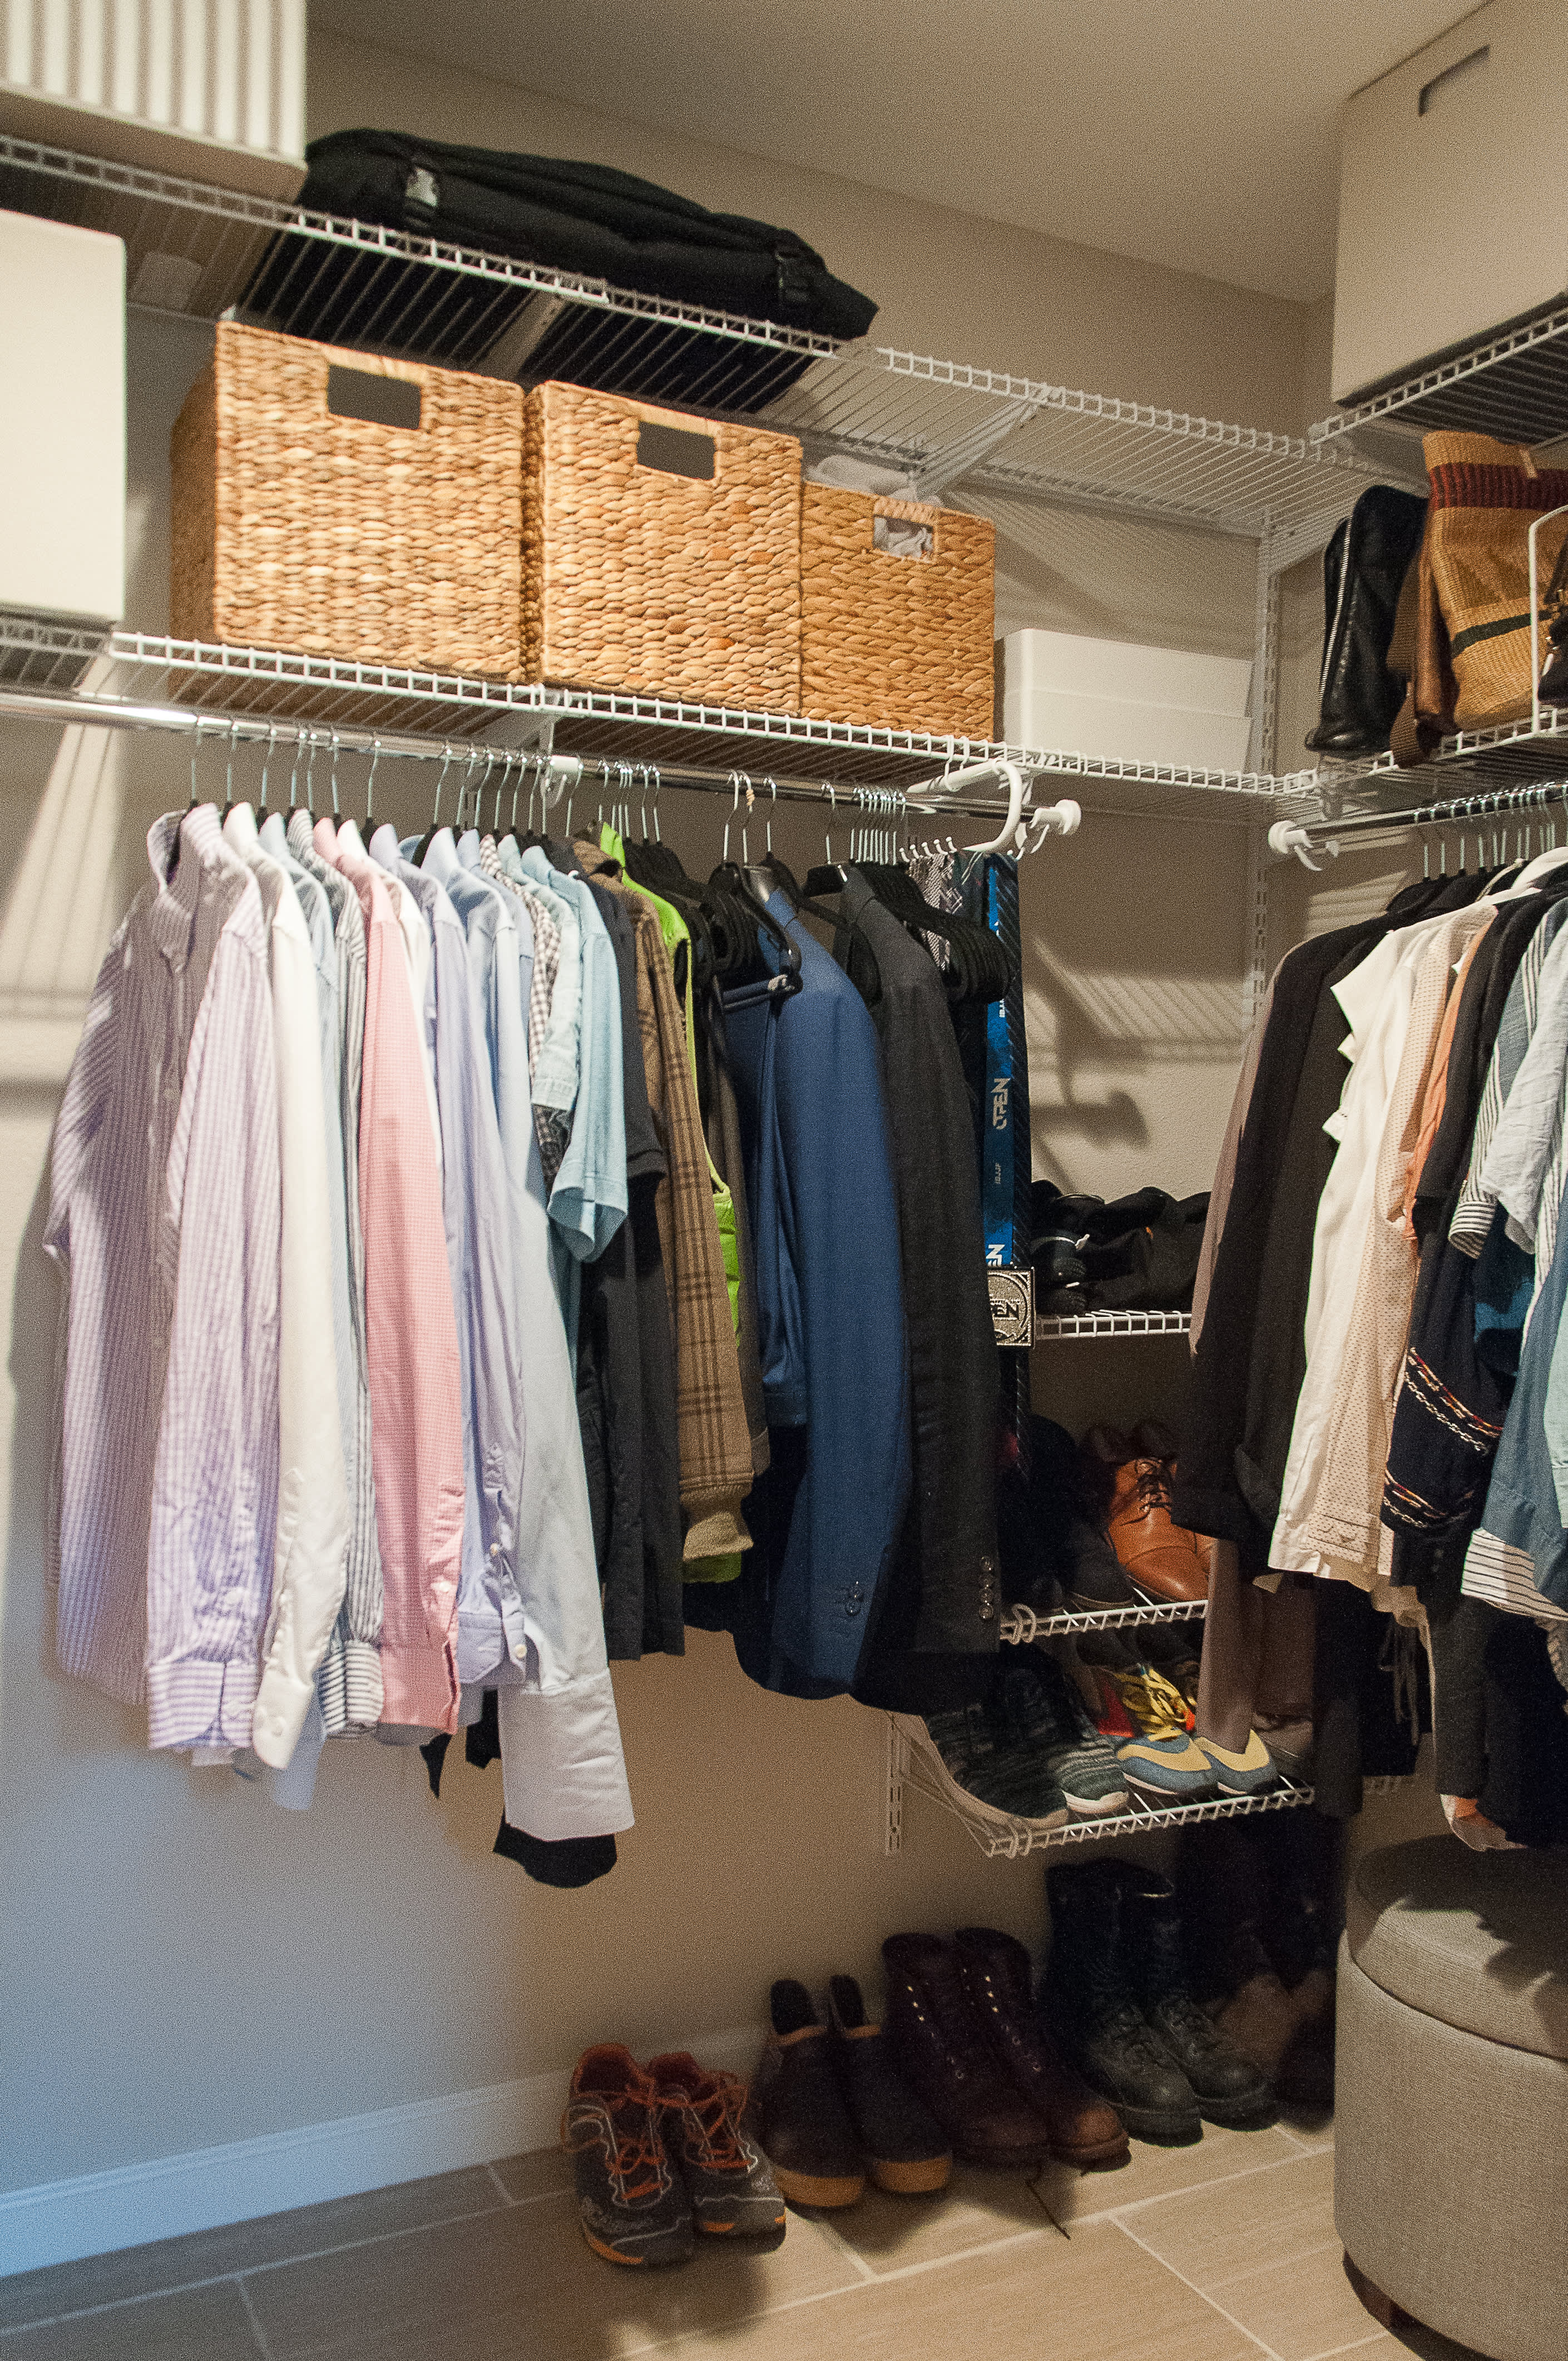 Before & After: A Walk-in Closet Gets a Makeover | Apartment Therapy